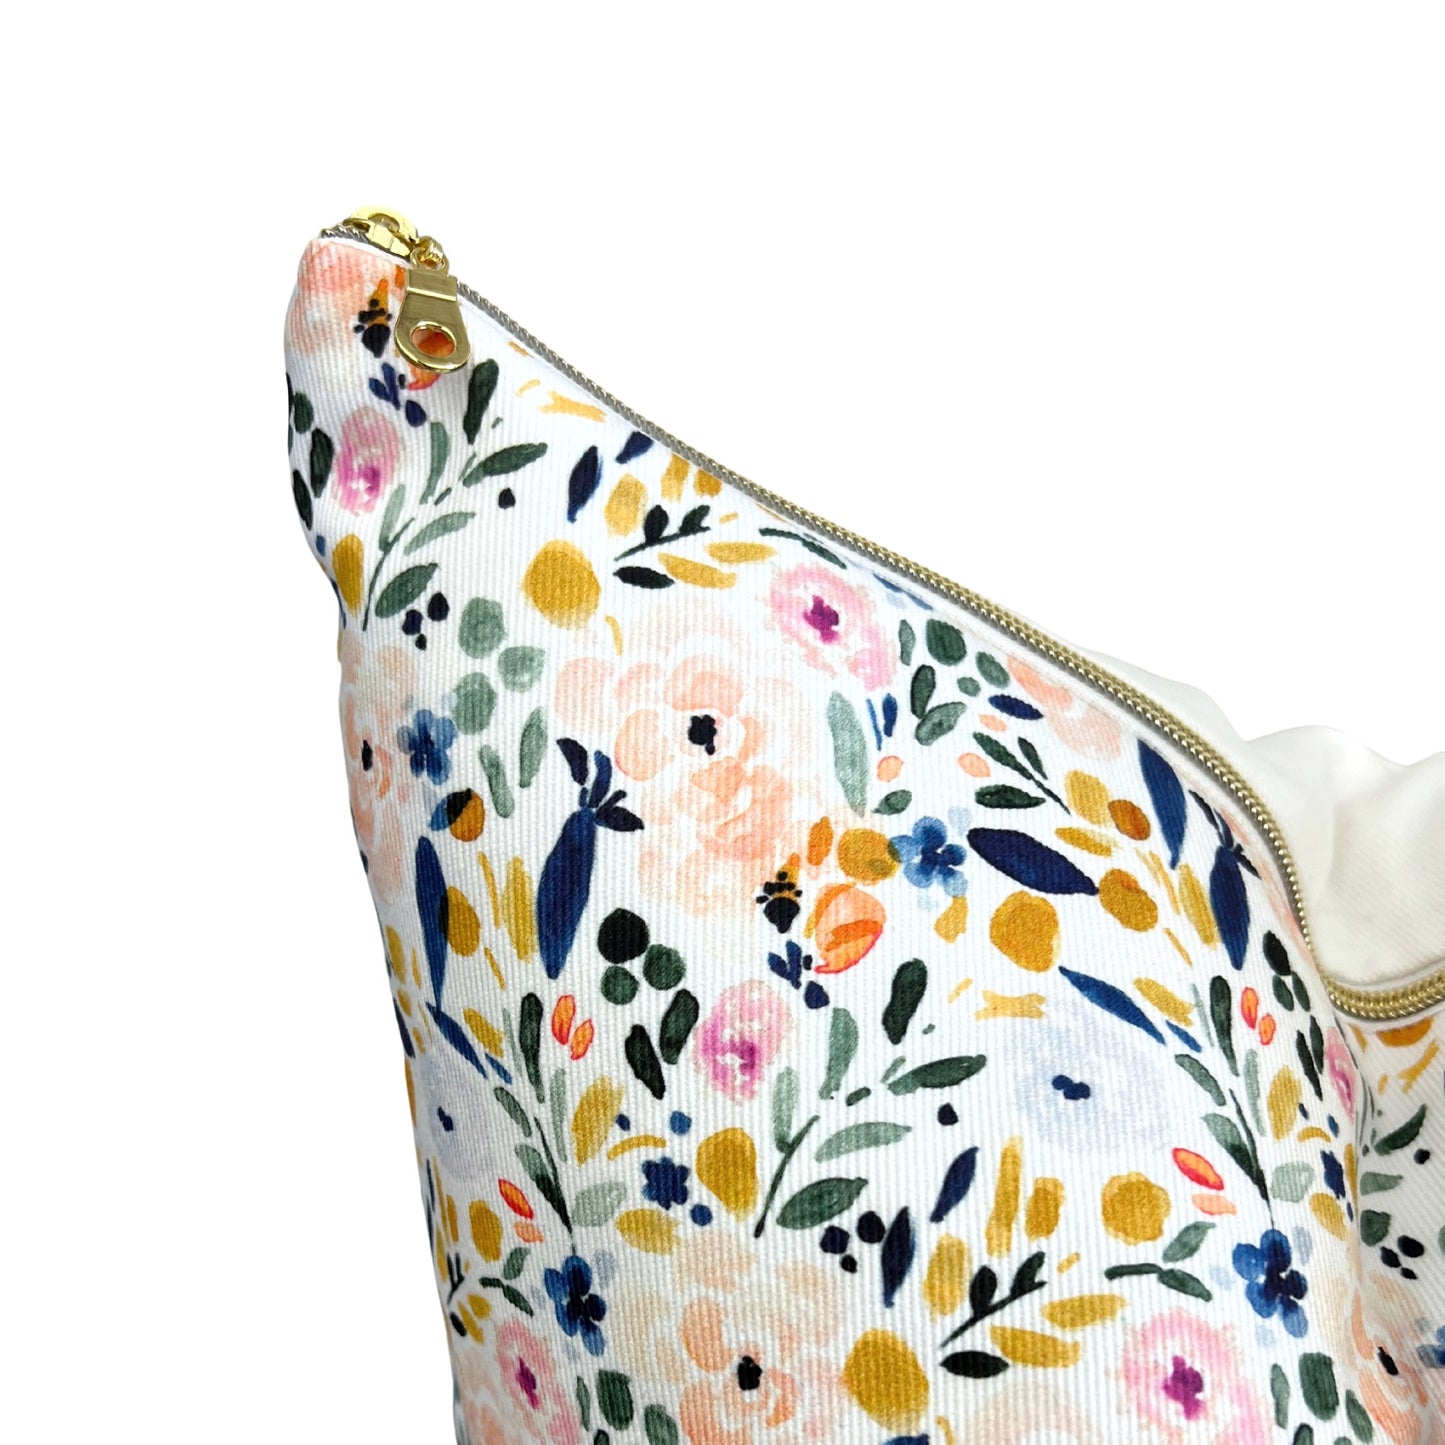 Sierra Floral Pillow Cover - Small